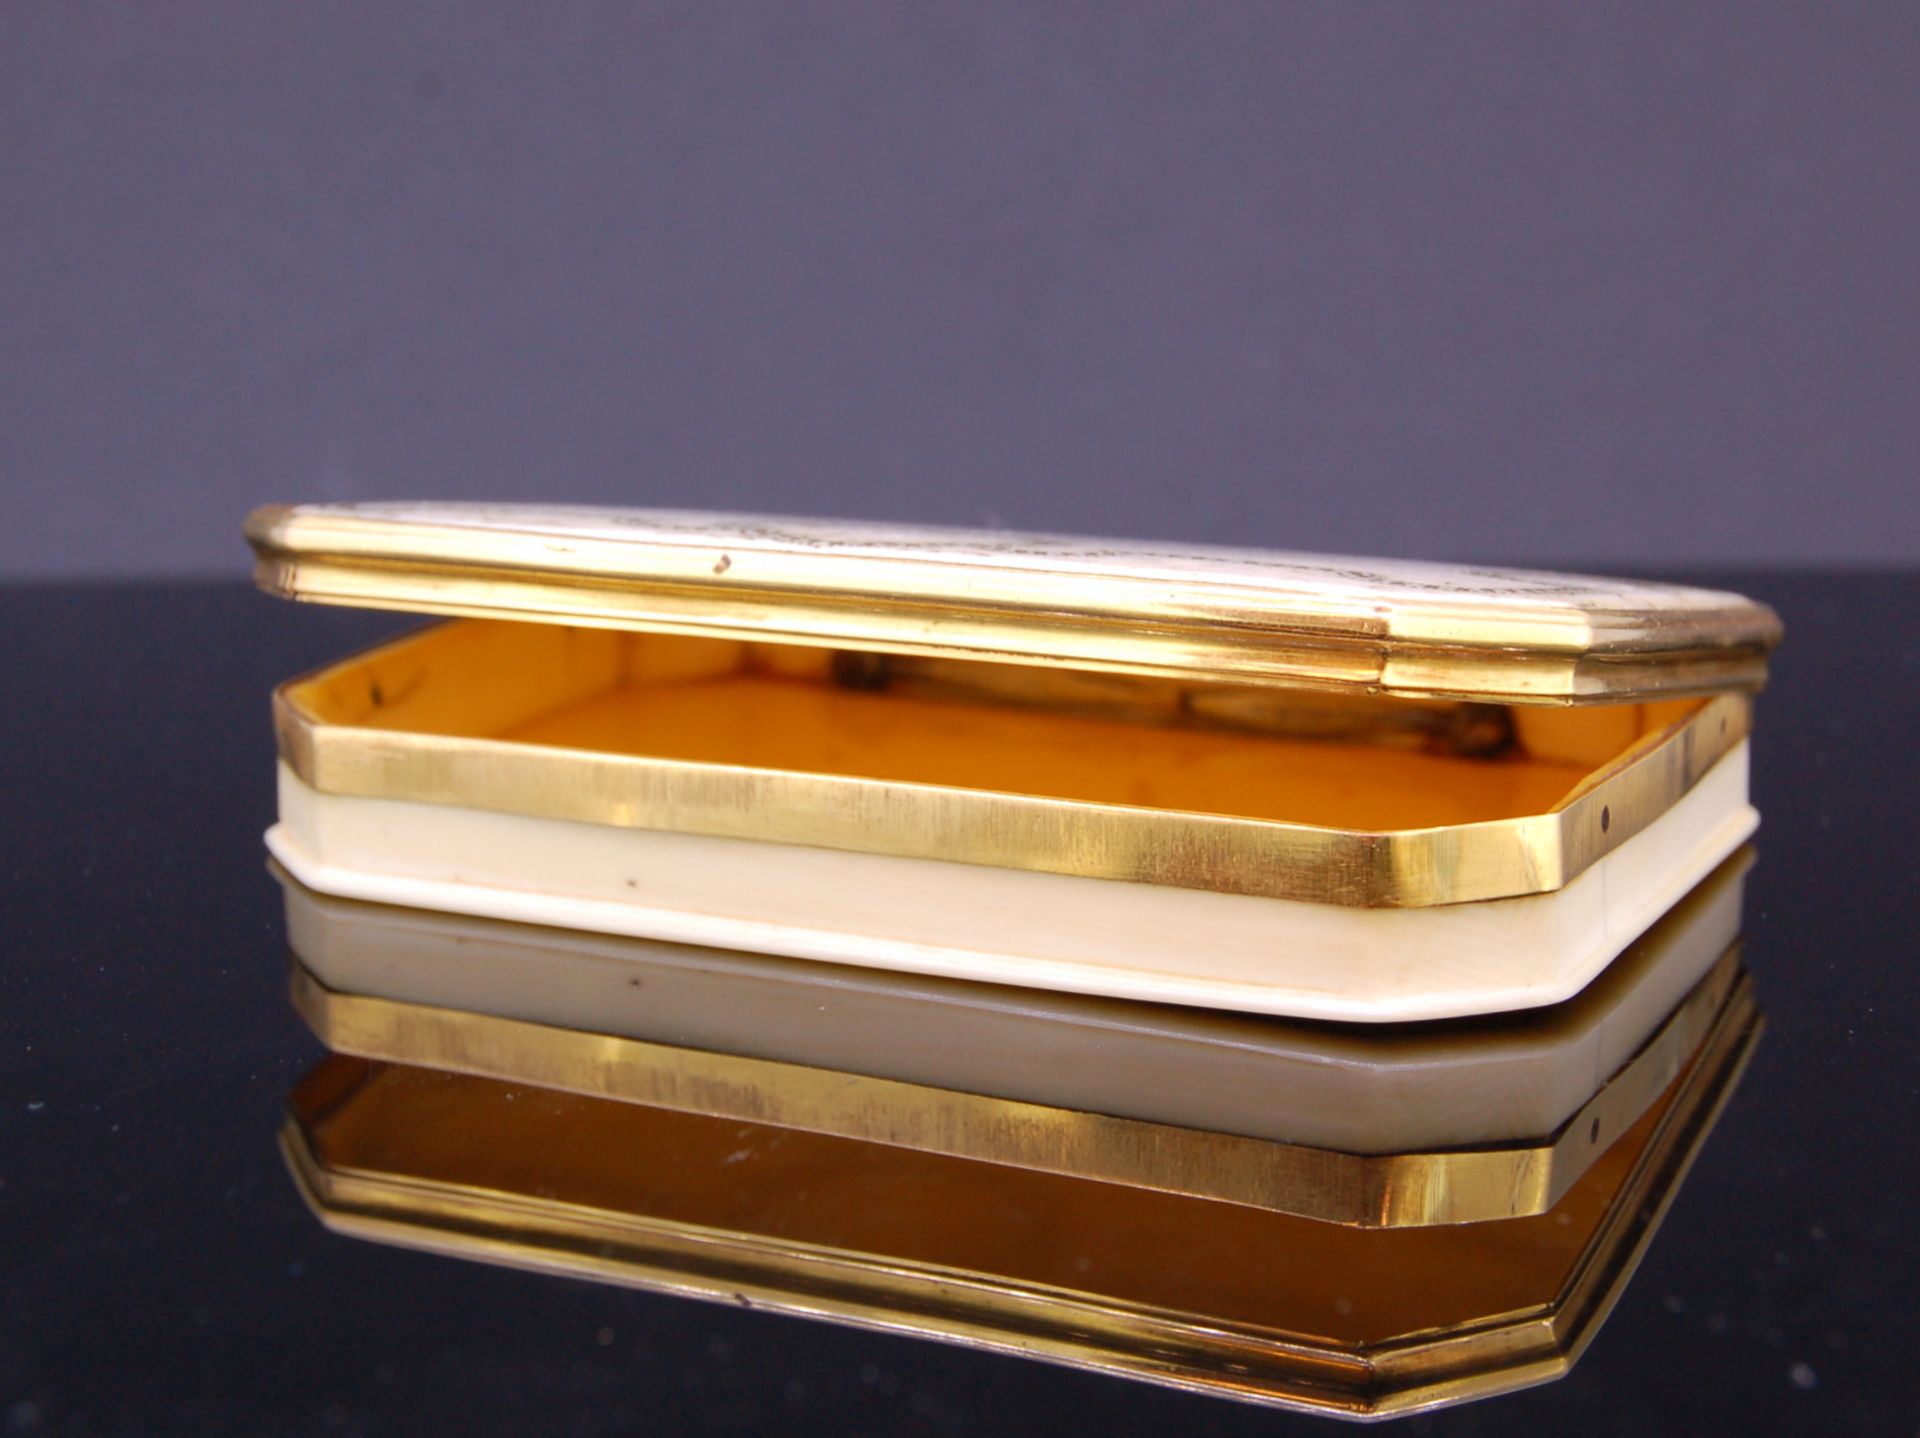 18th CENTURY RECTANGULAR SNUFFBOX WITH GOLD MOUNT - Image 4 of 4